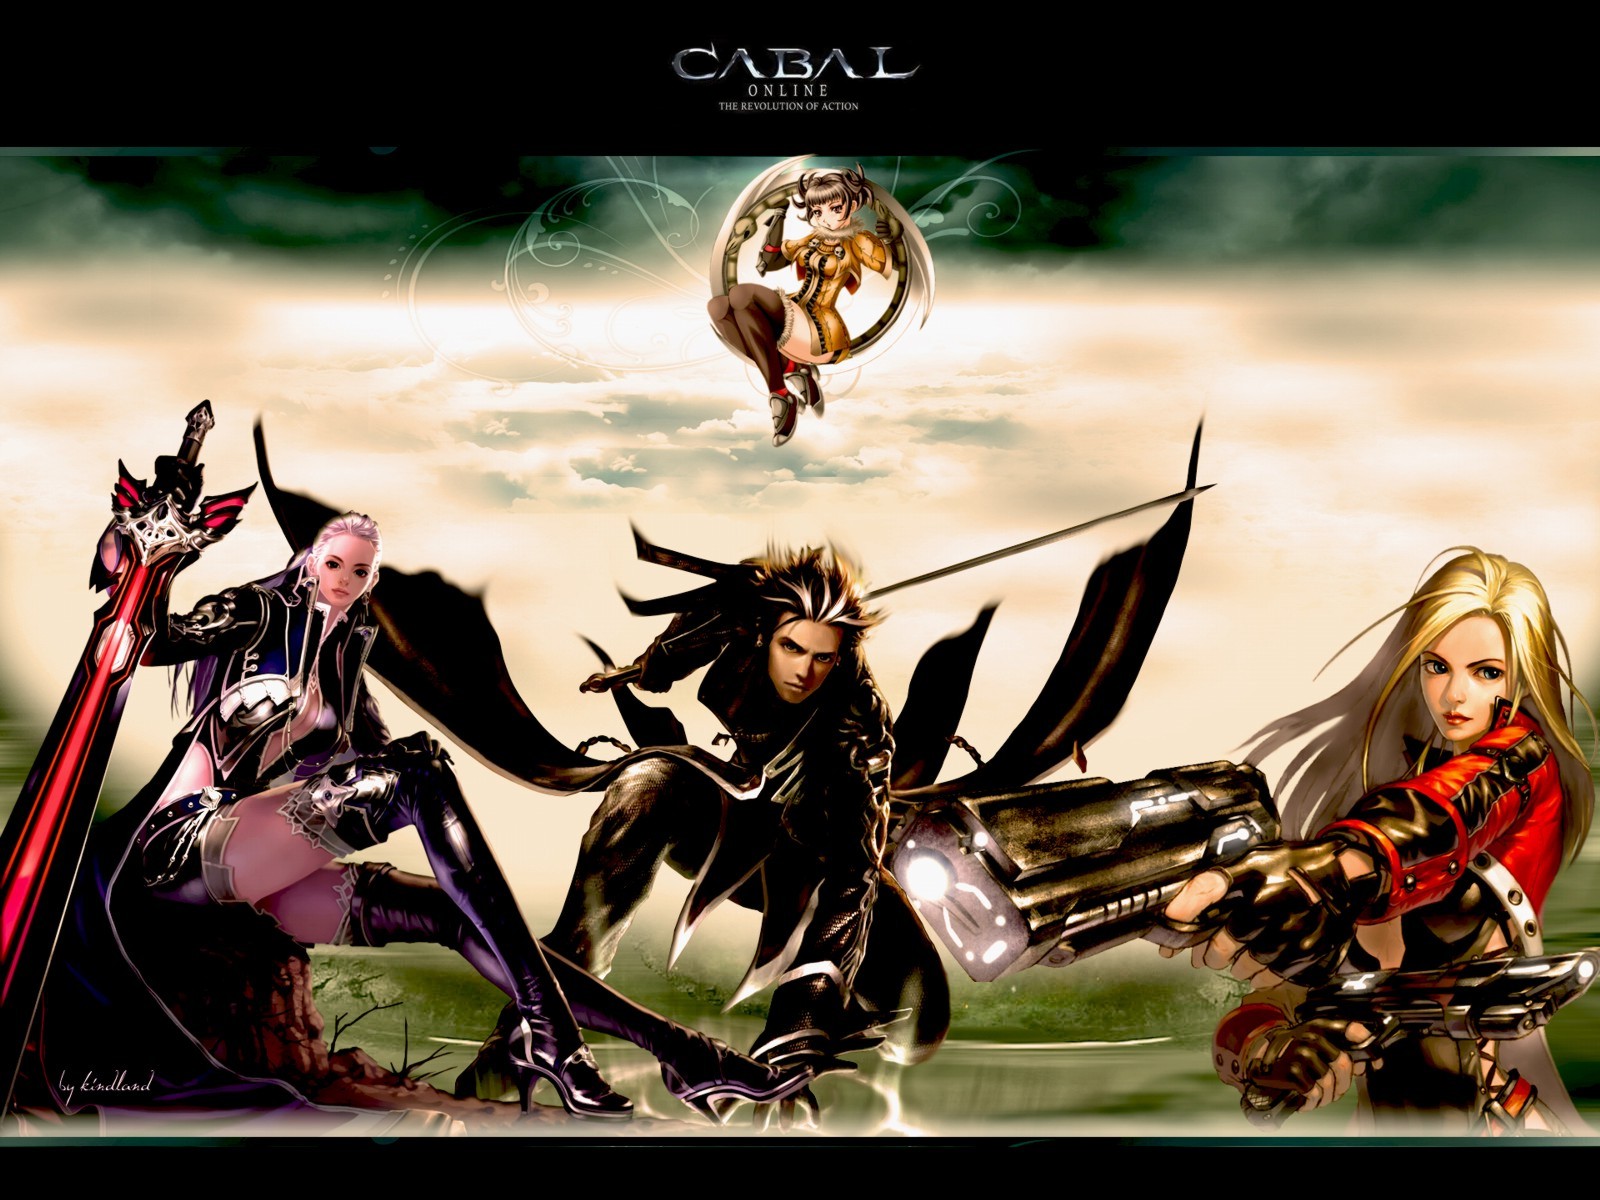 video game, cabal online